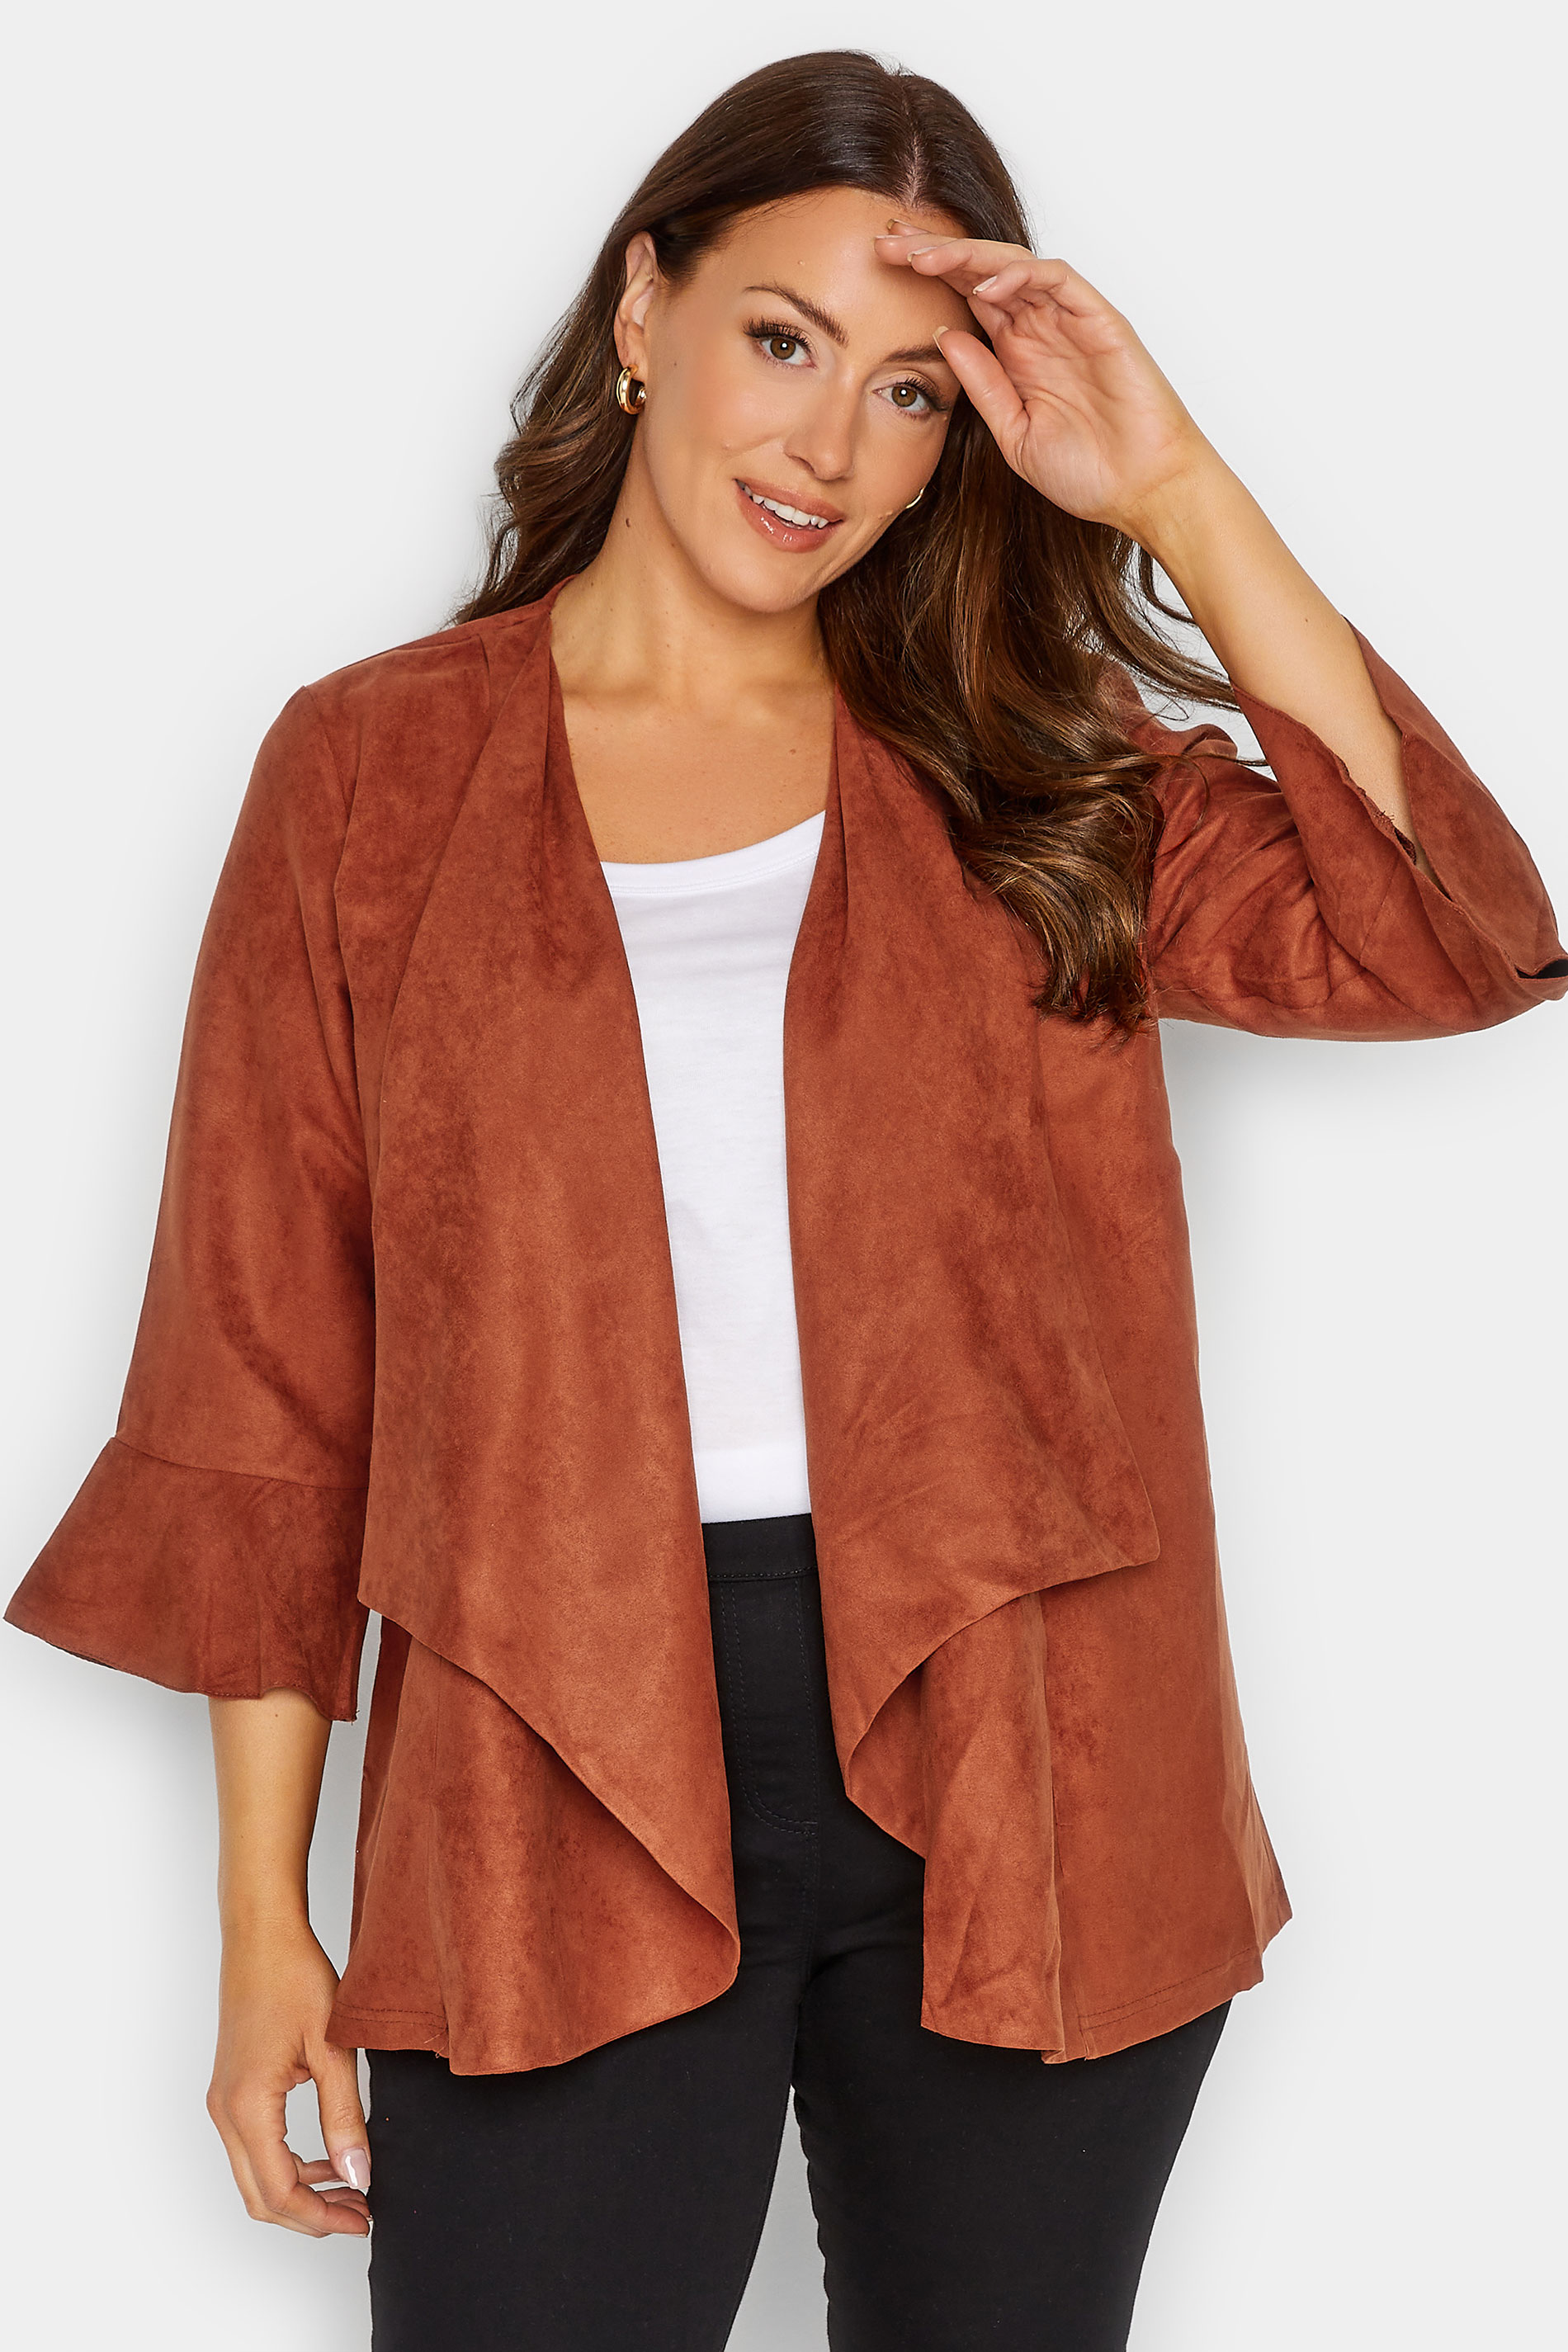 M&Co Brown Suedette Waterfall Jacket | M&Co 1